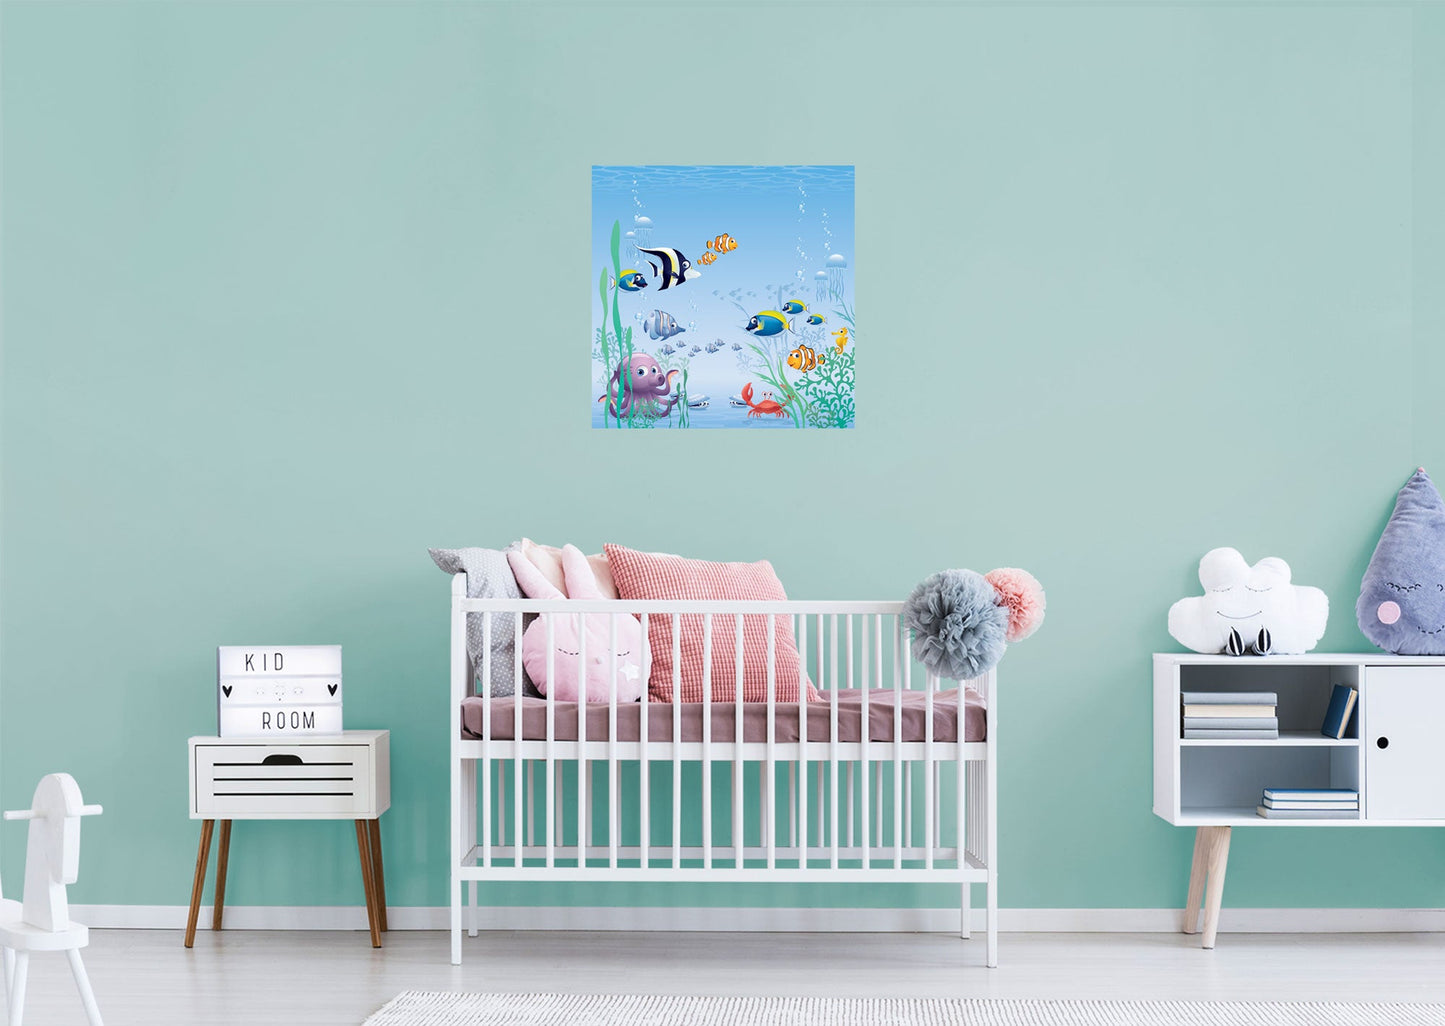 Nursery:  Aquatic Family Mural        -   Removable Wall   Adhesive Decal